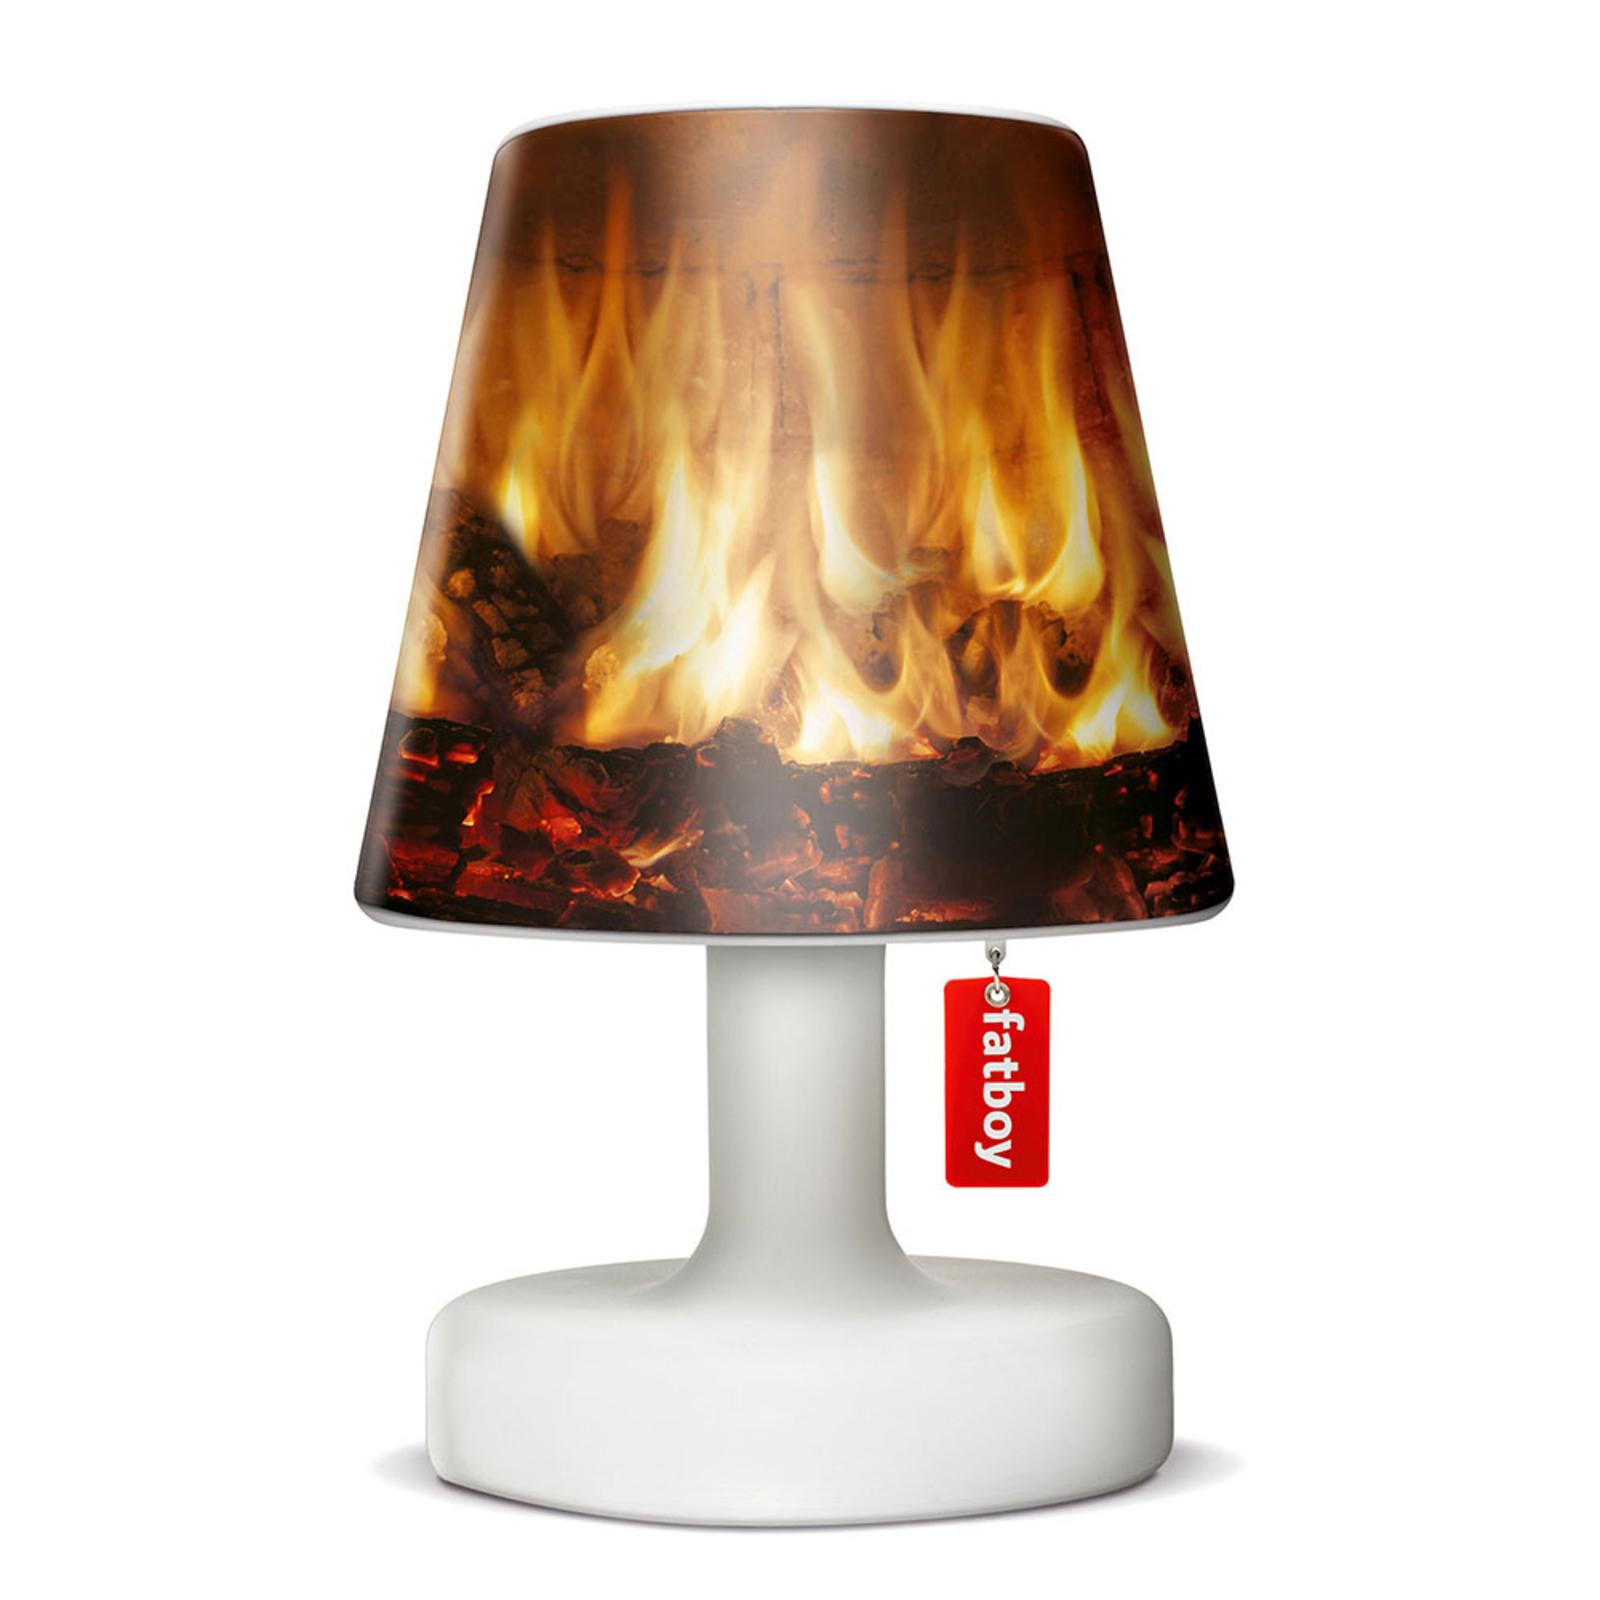 Fatboy Cooper Cappie shade, fireplace